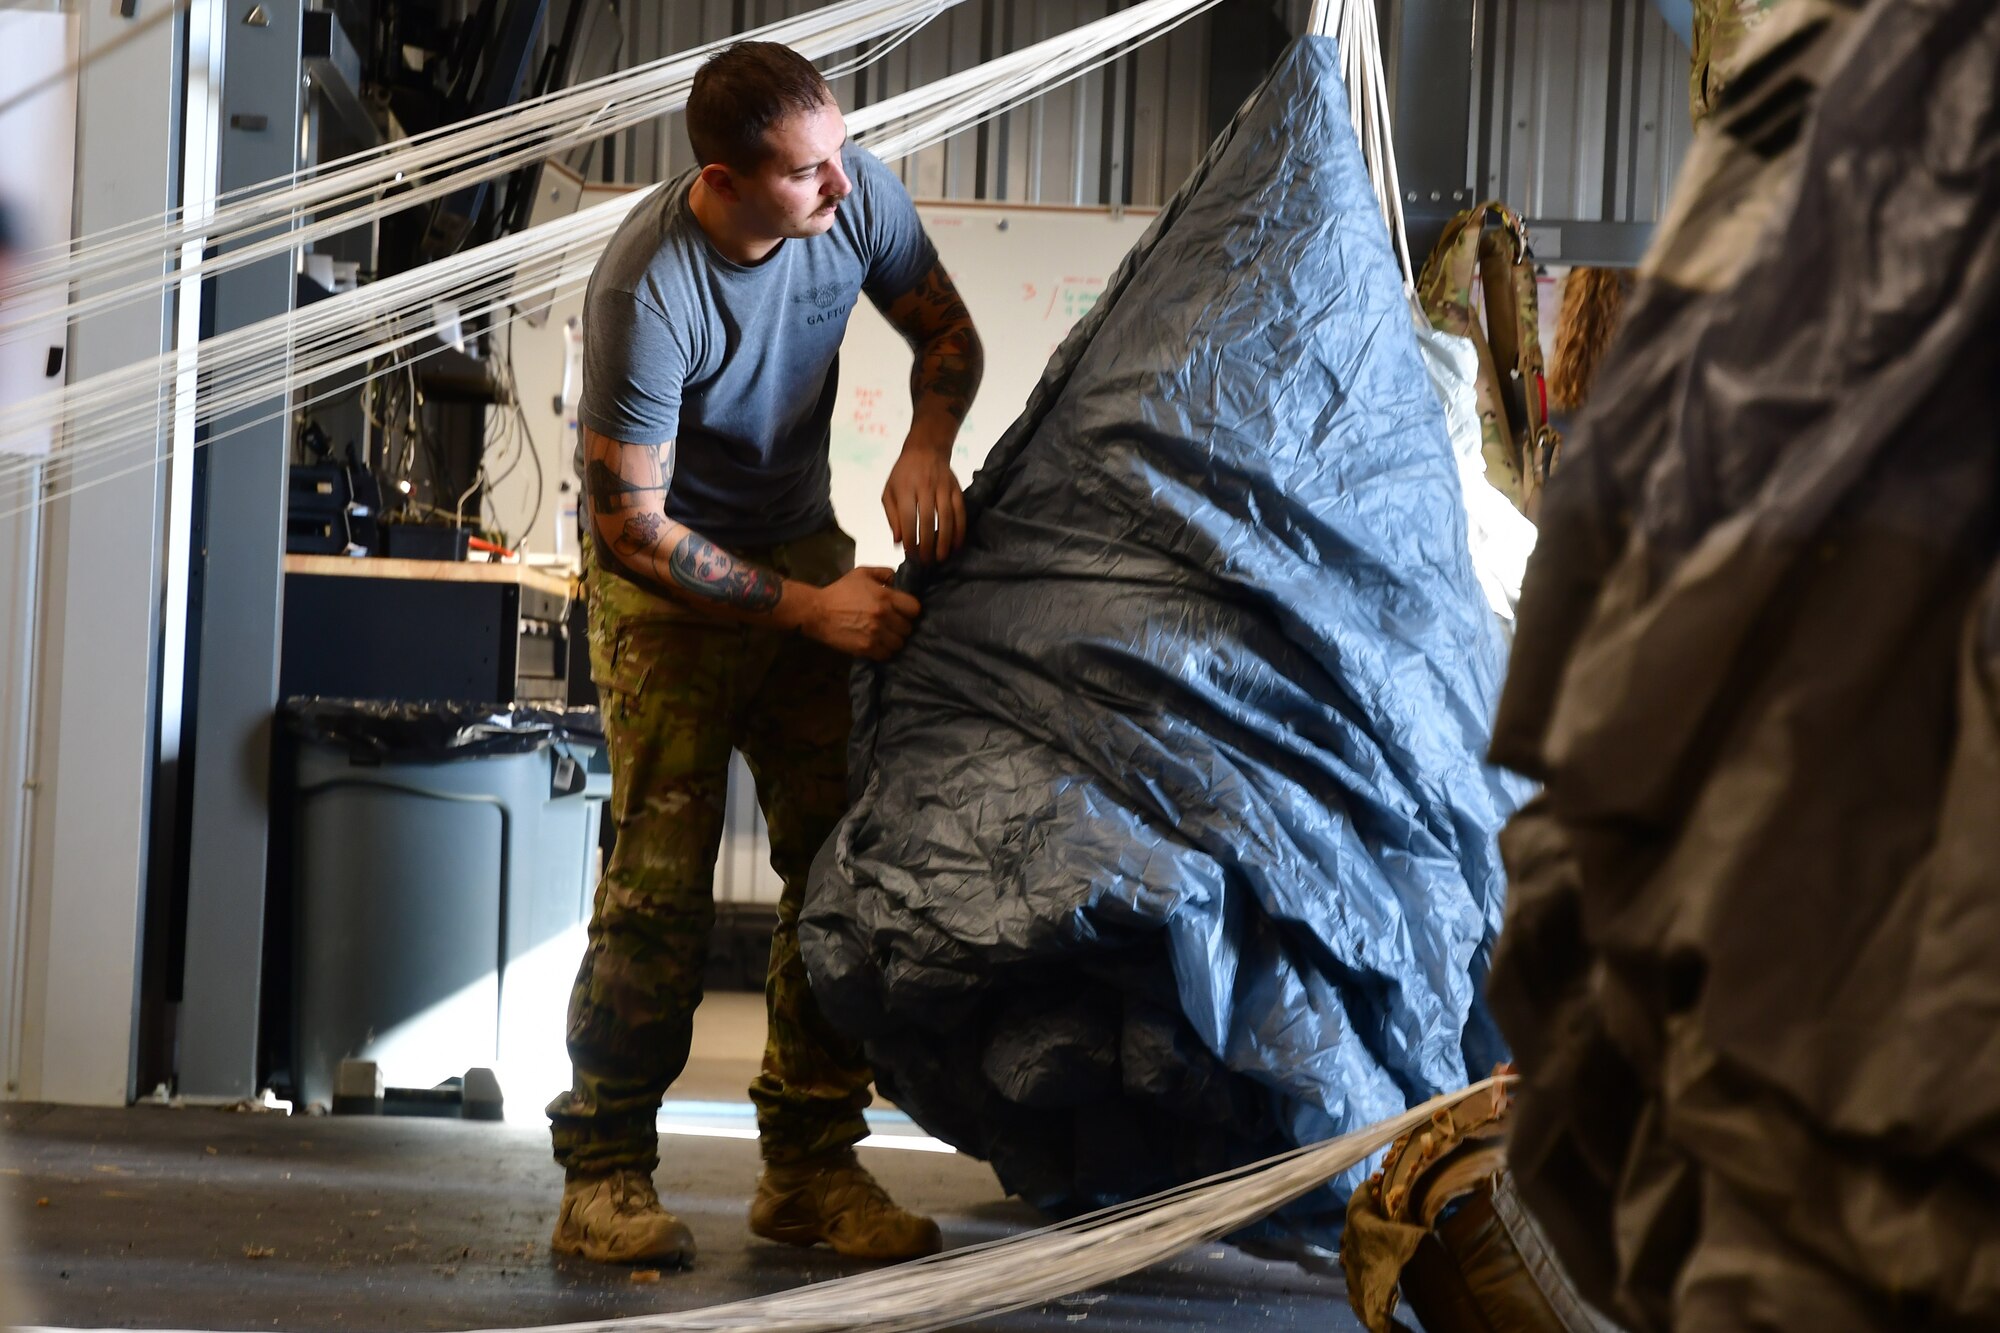 During the jump training parachute riggers packed parachutes non-stop, allowing the pararescuemen to perform back to back jumps throughout their training day. In an era of great power competition, maintaining high-end readiness is mission critical.